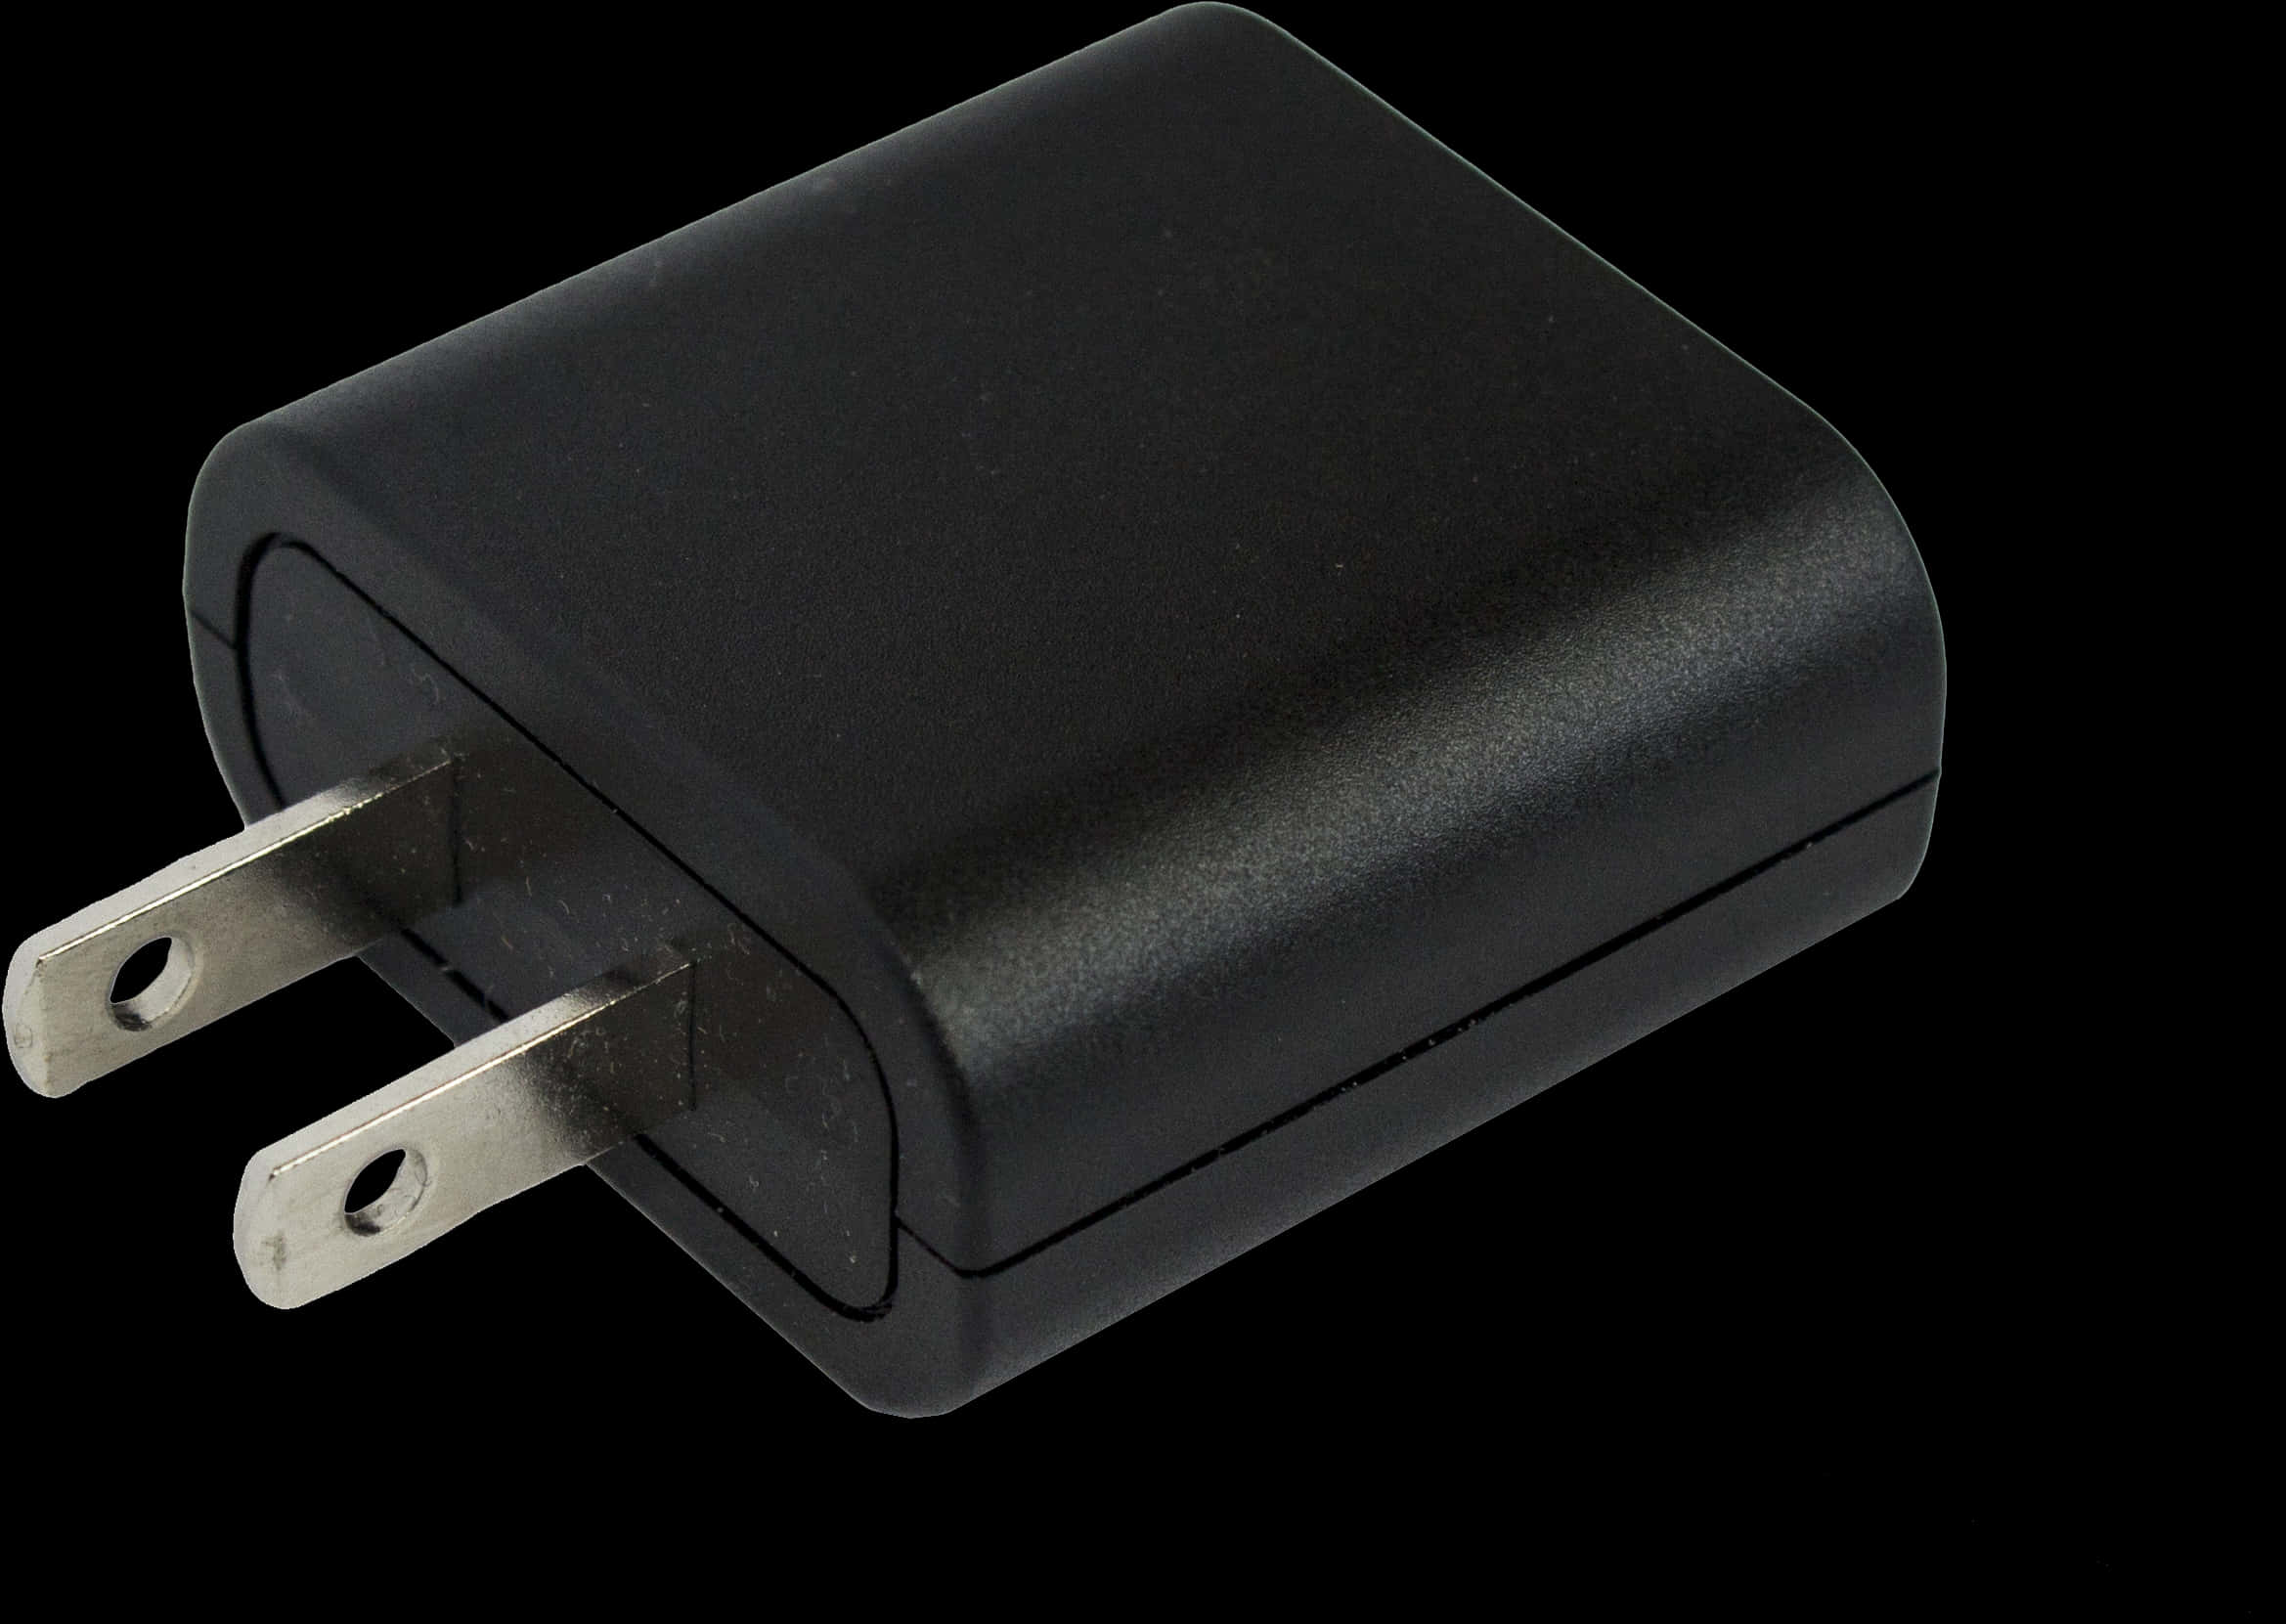 Black Phone Charger Adapter